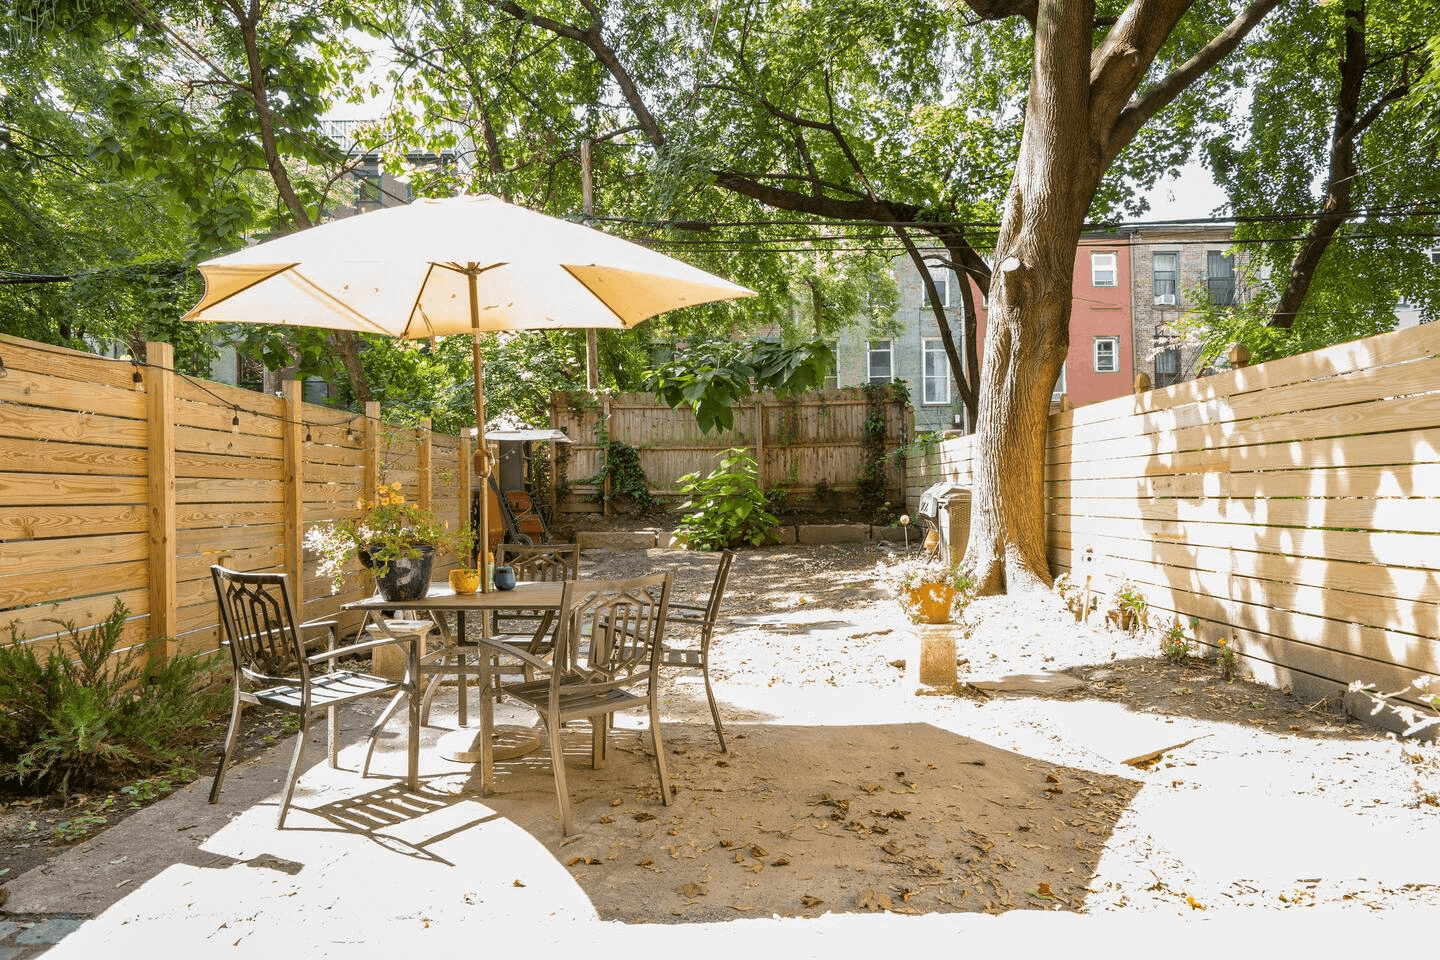 fenced-in rear yard with a tree